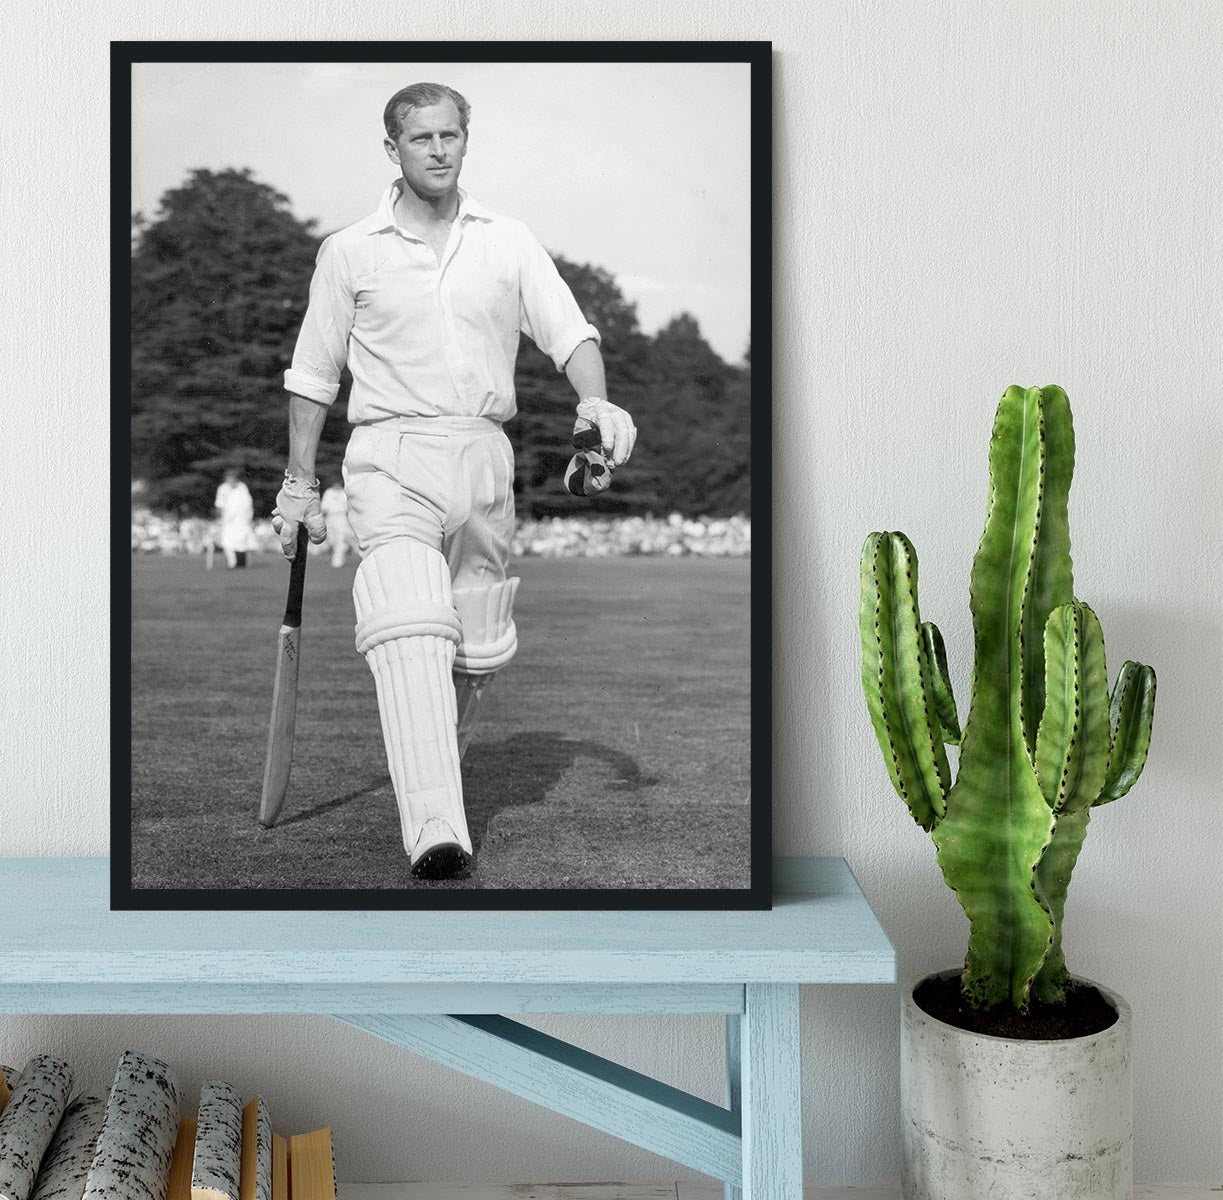 Prince Philip as cricket captain in a charity match Framed Print - Canvas Art Rocks - 2